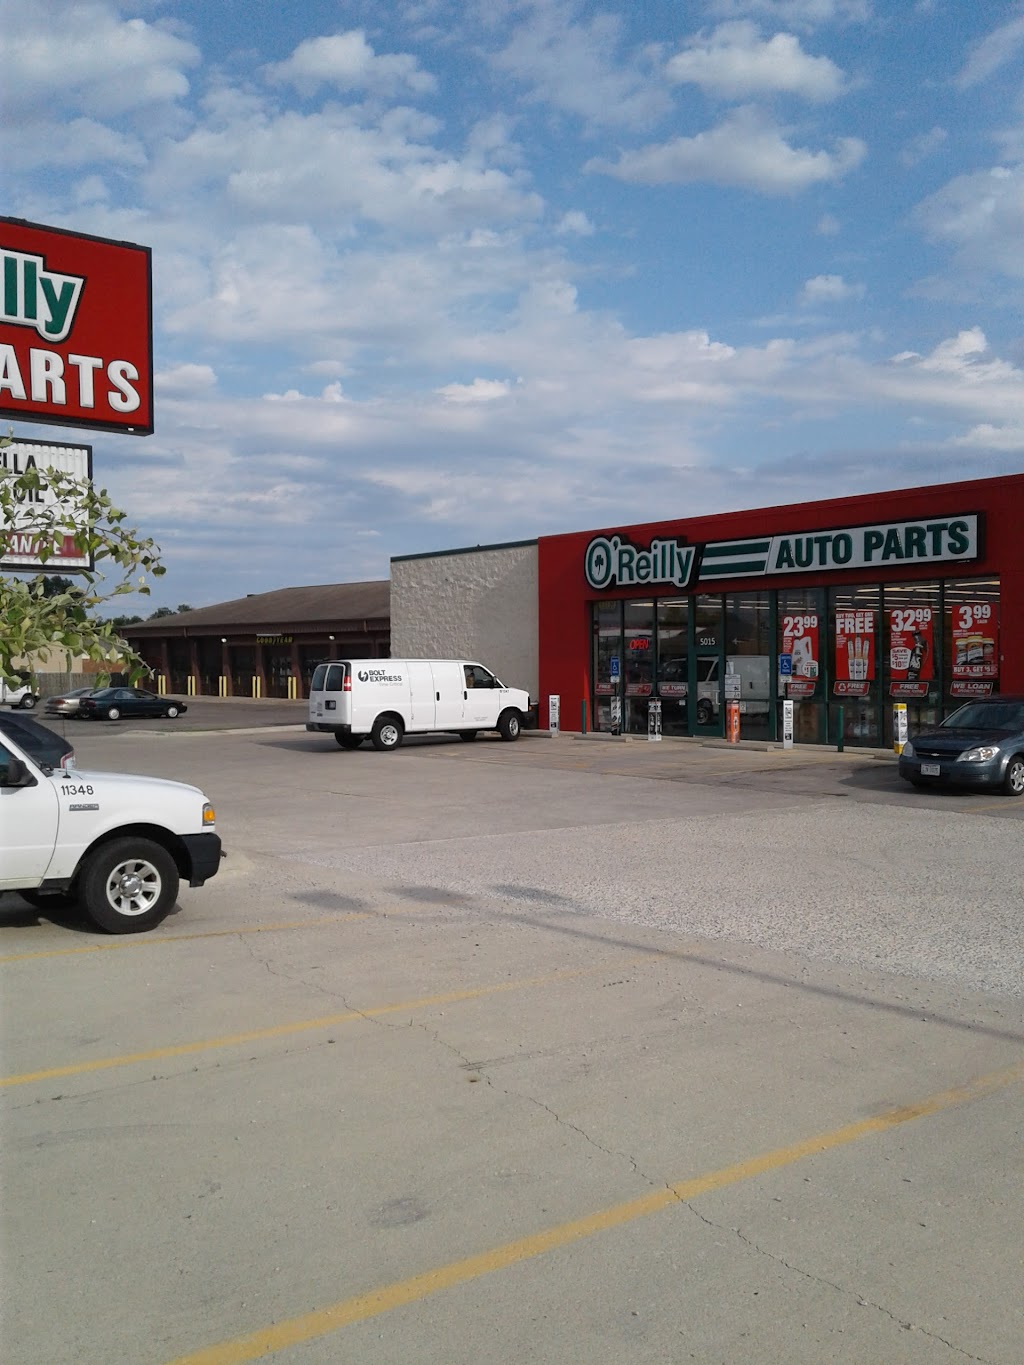 OReilly Auto Parts | 5015 Roberts Rd, Hilliard, OH 43026 | Phone: (614) 876-5191